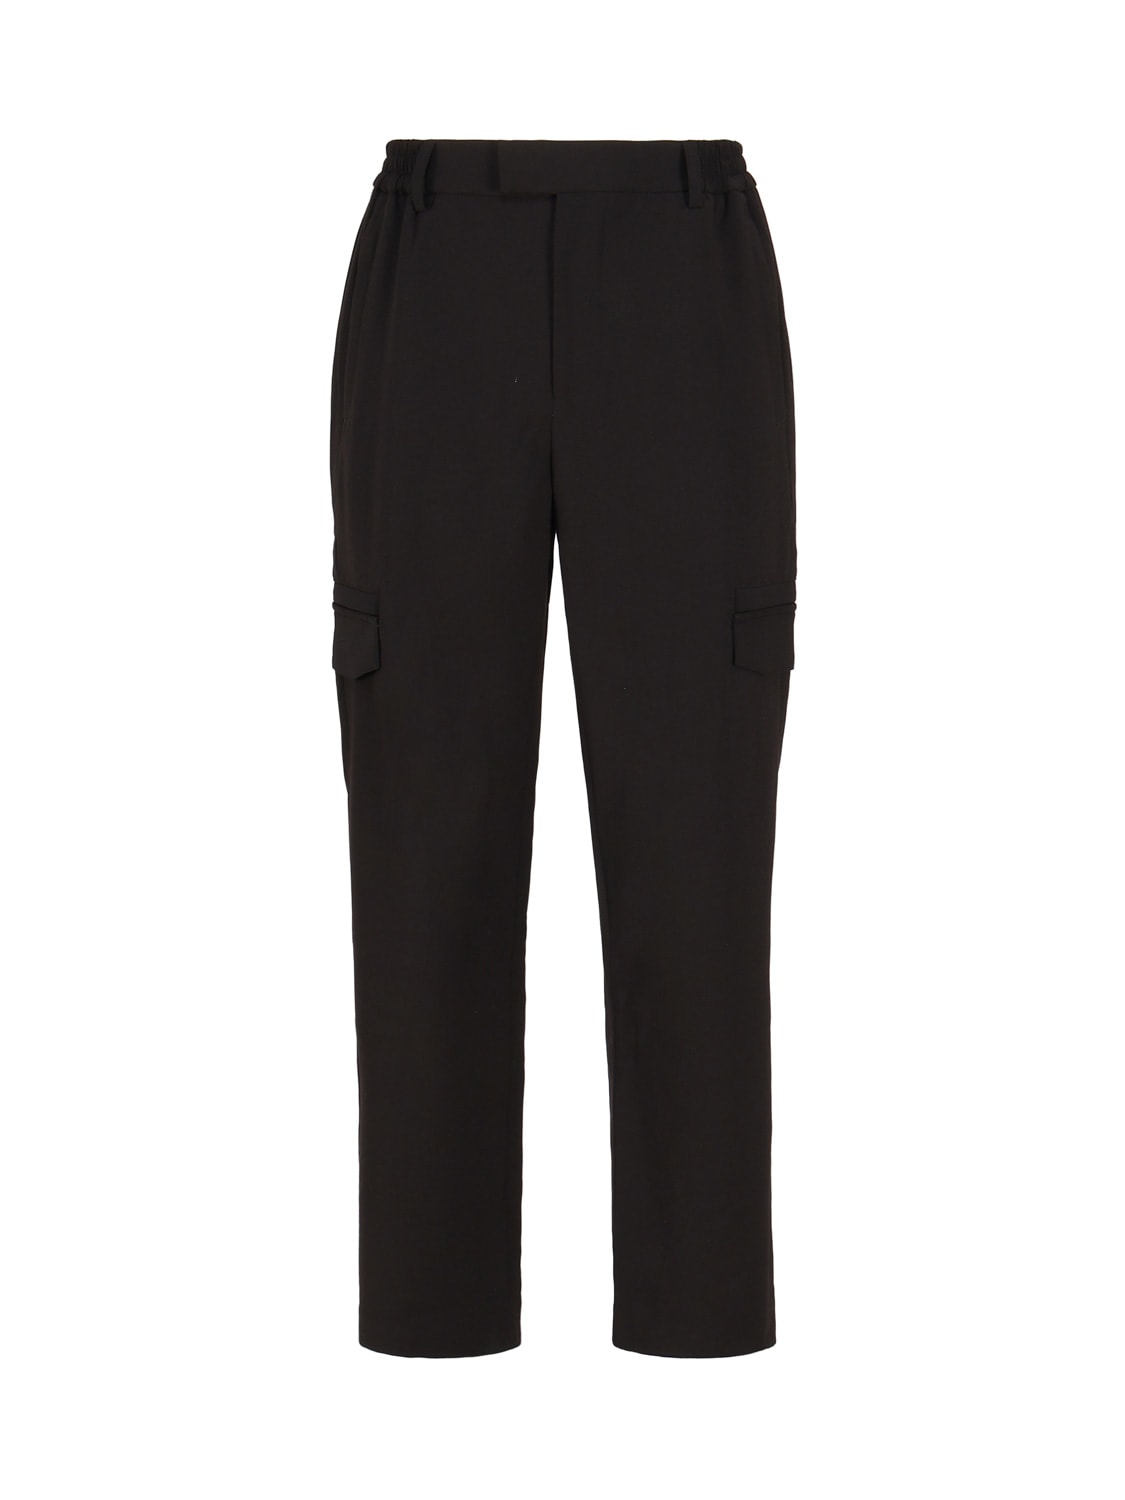 REPRESENT WIDE TROUSERS WITH SIDE POCKETS